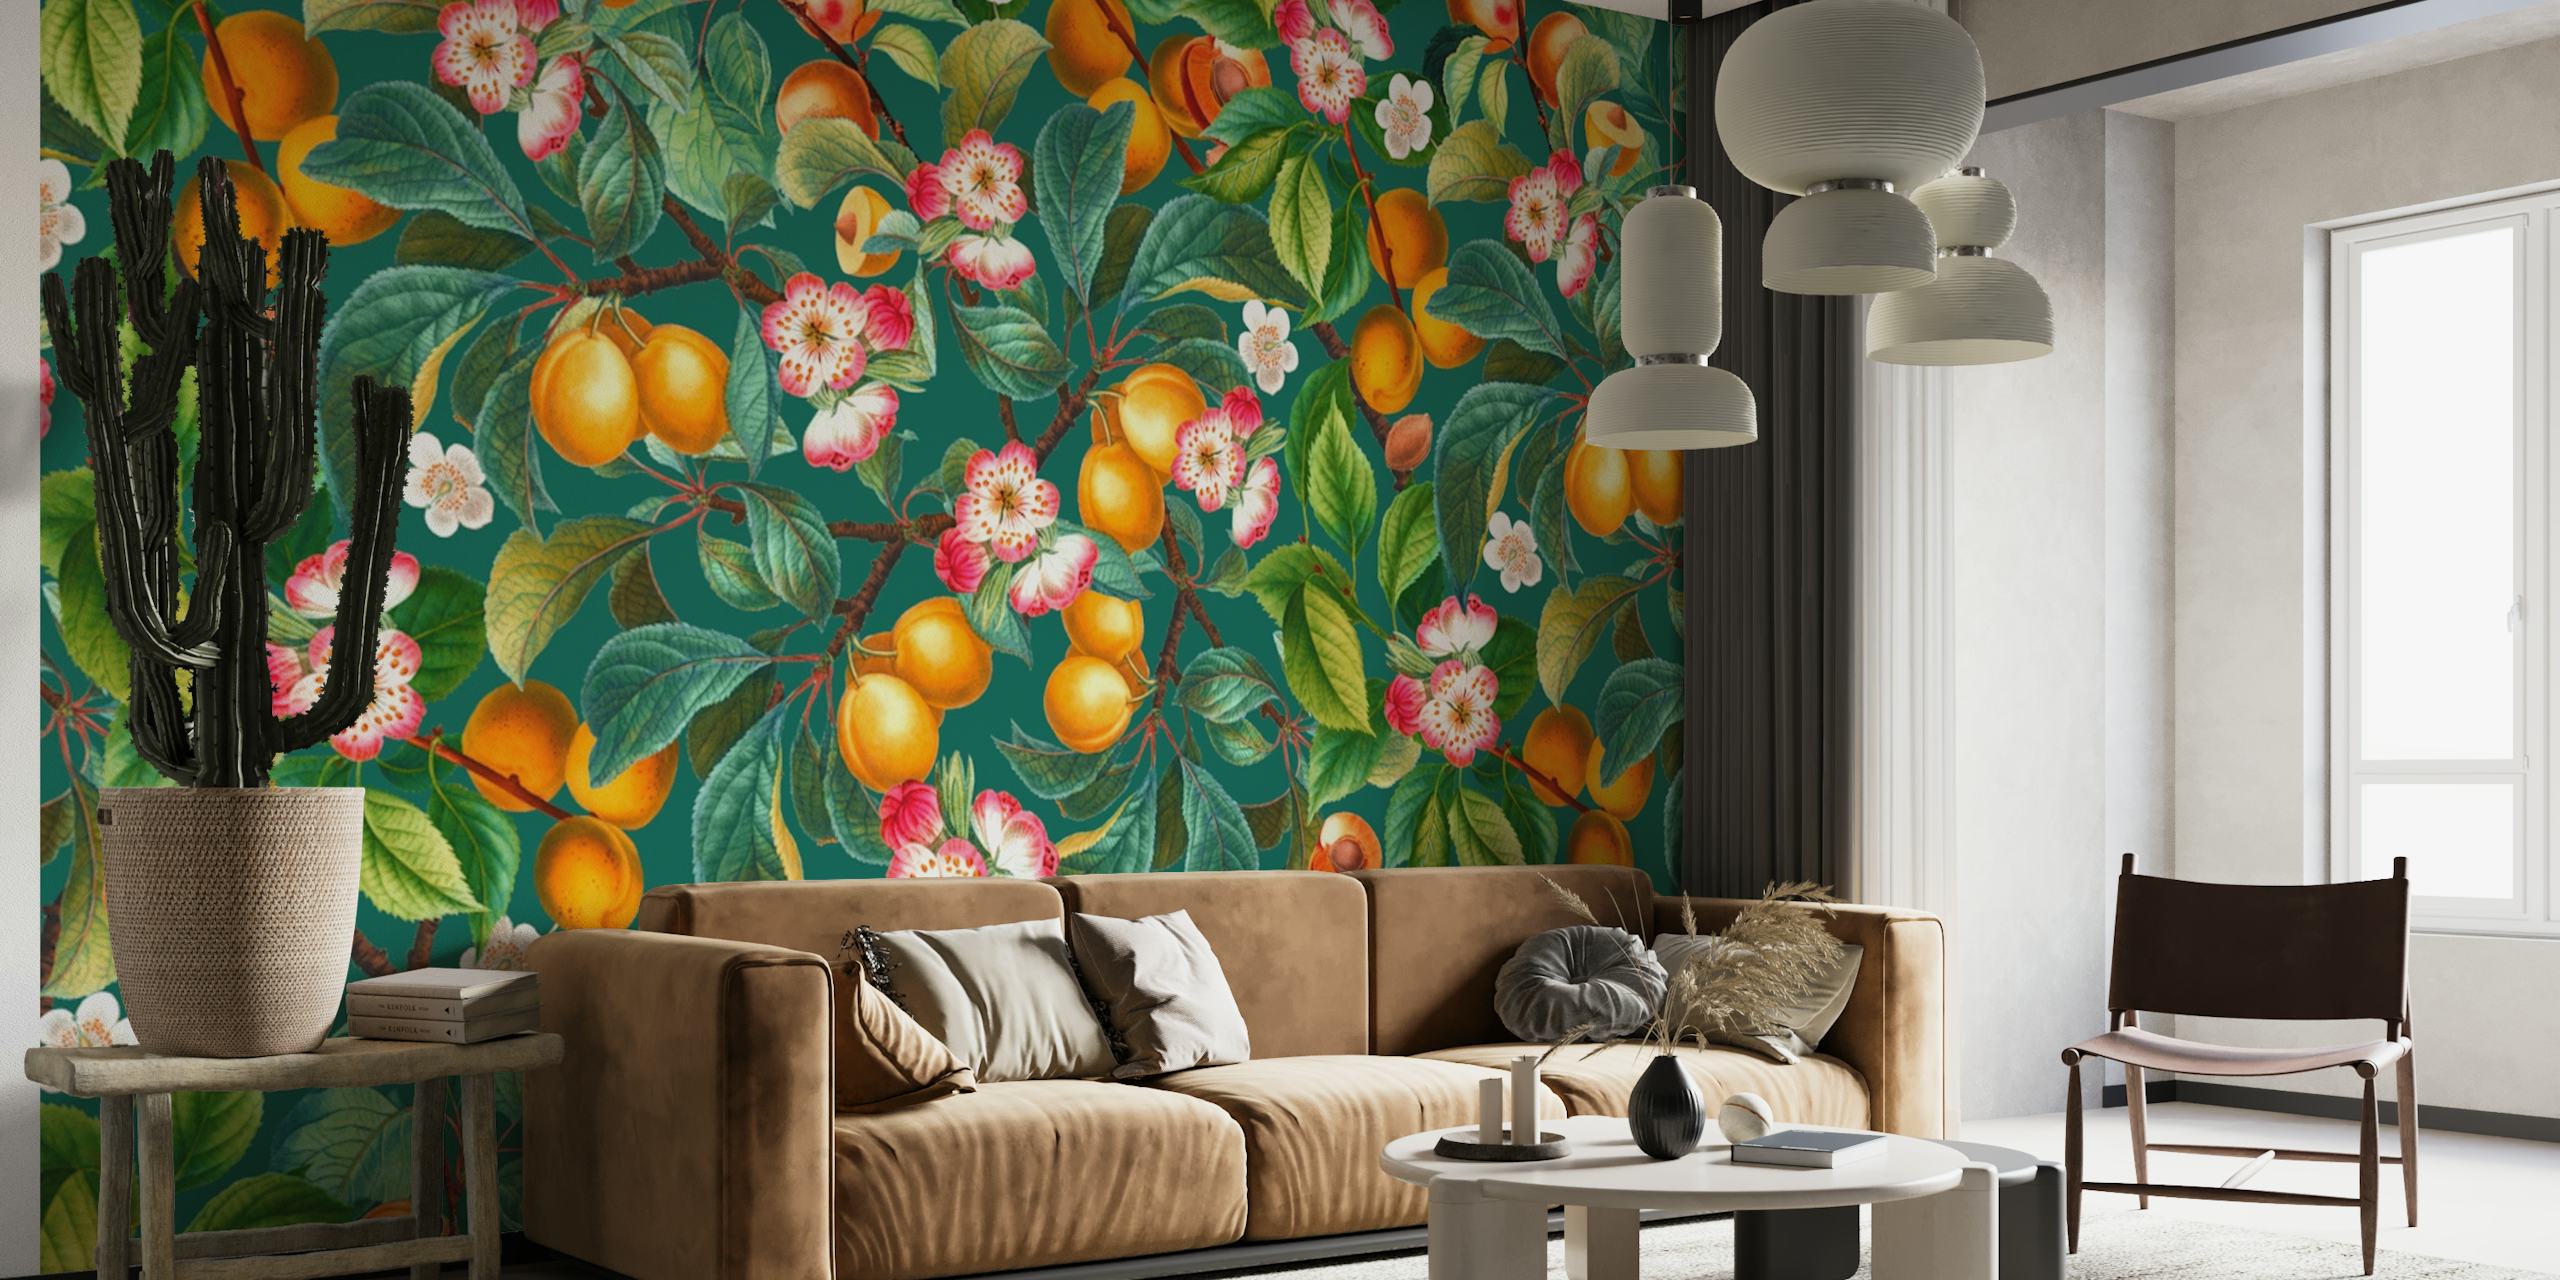 Lush fruits and flowers pattern wall mural with oranges and blossoms